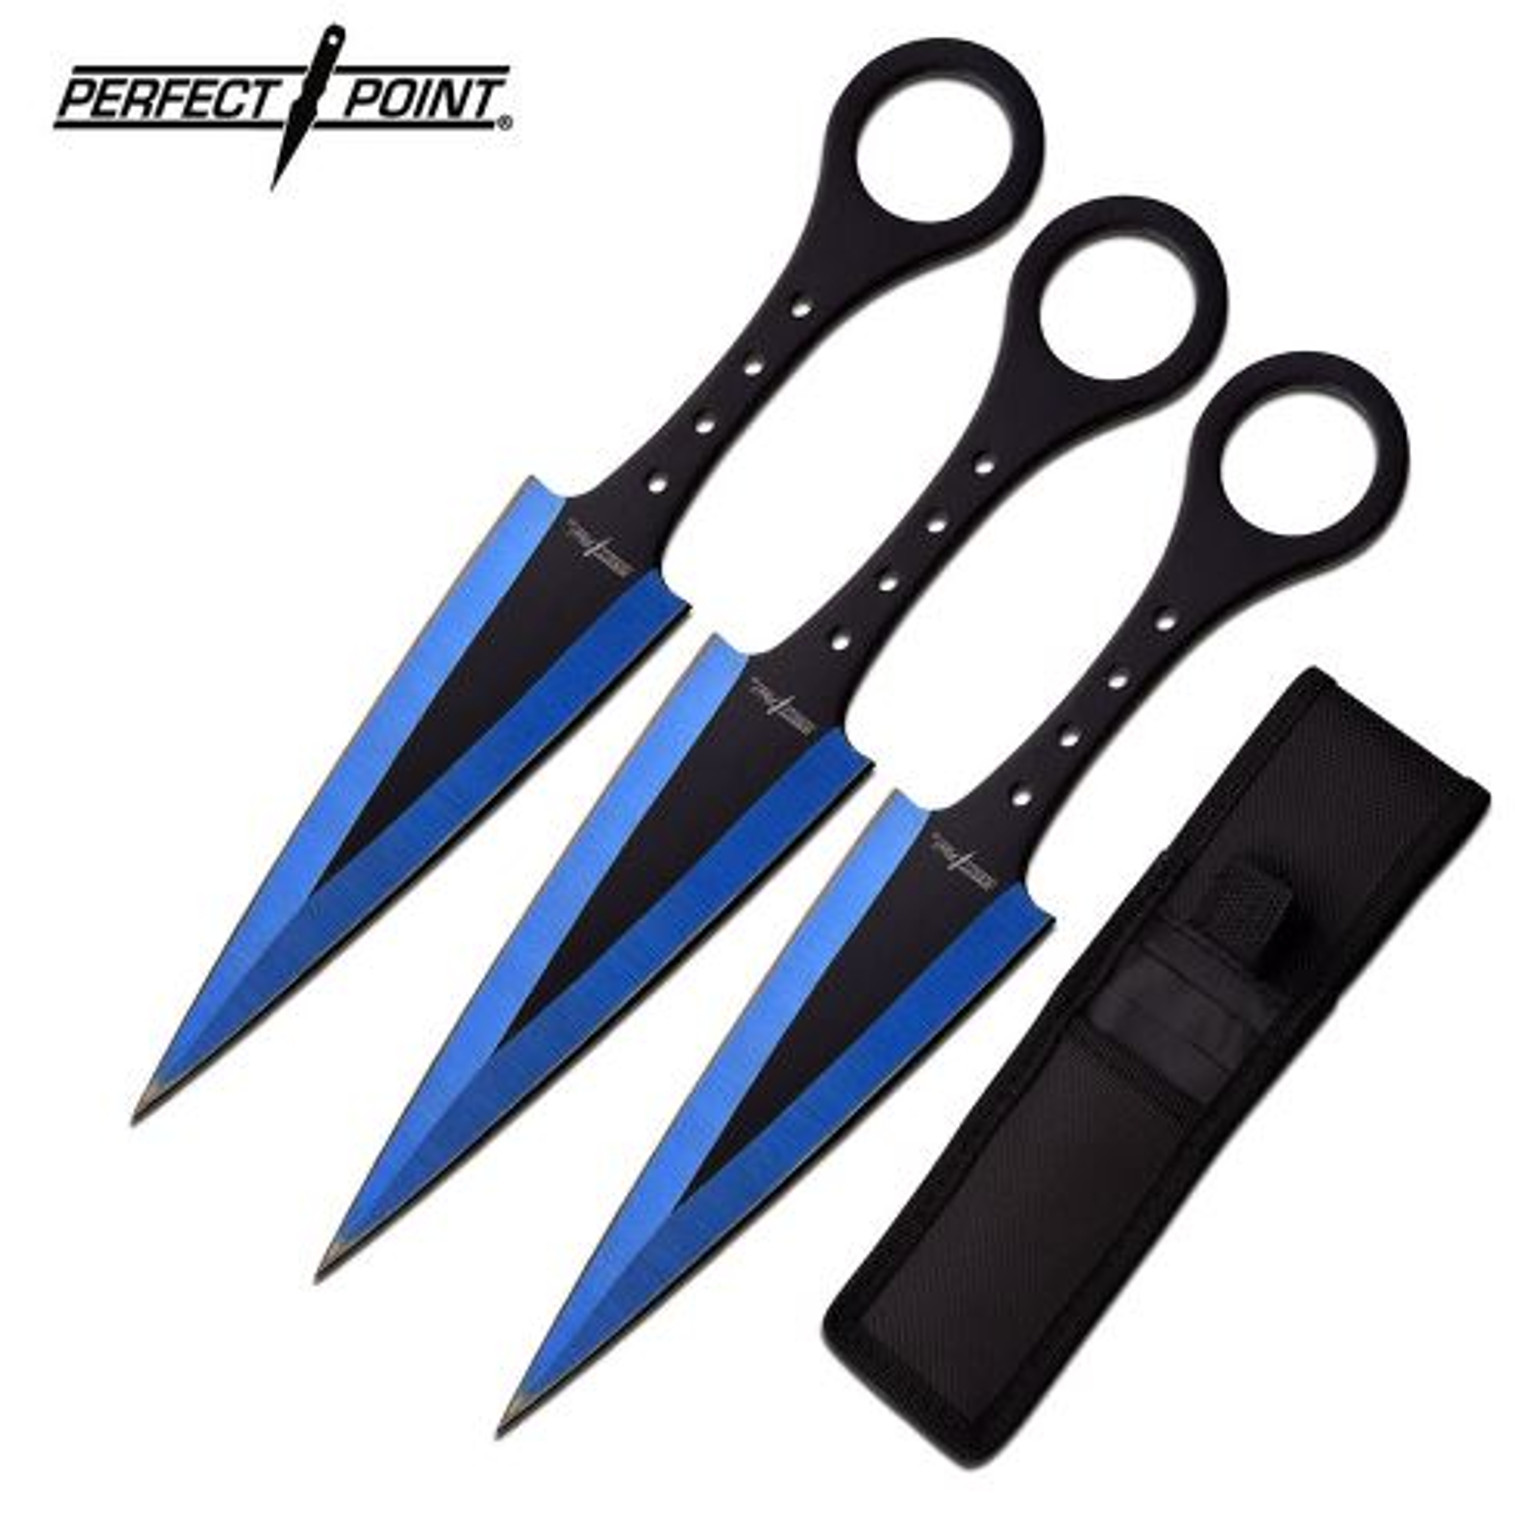 Perfect Point 106BL-3 Throwing Knife Set